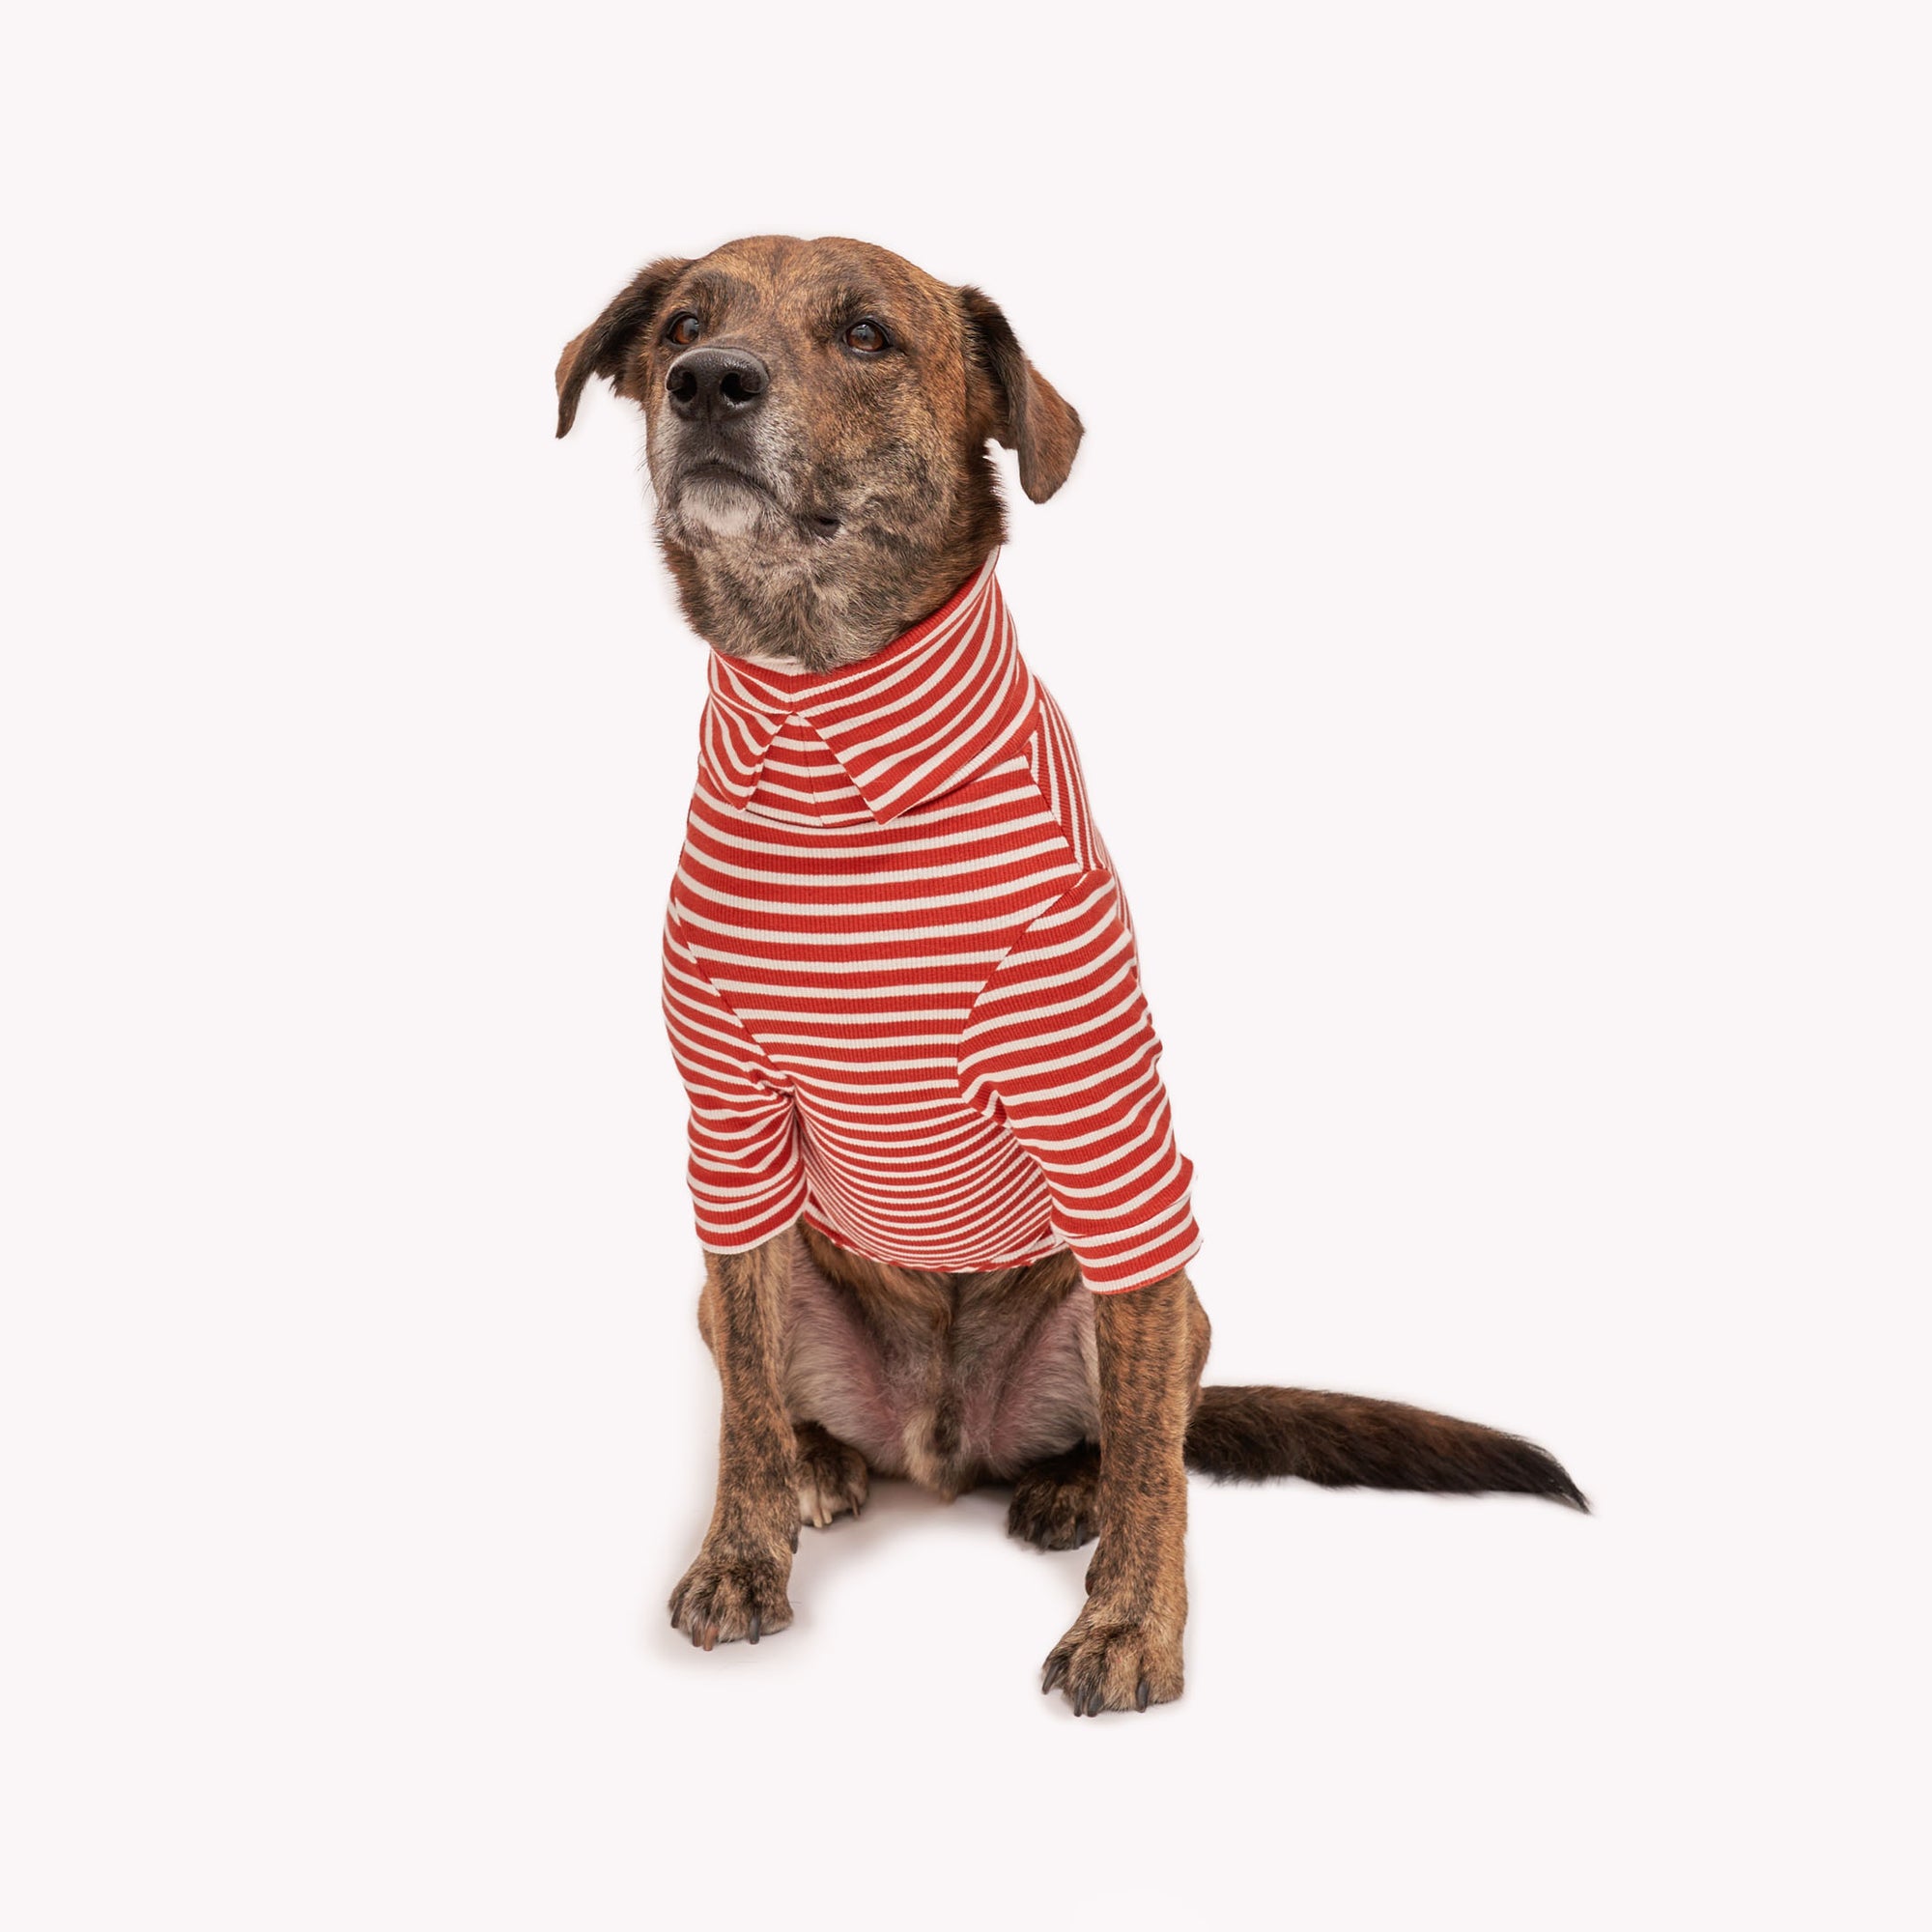 Confident brindle dog sitting in a snug Rust & Ivory  striped turtleneck, a true trendsetter in canine apparel.